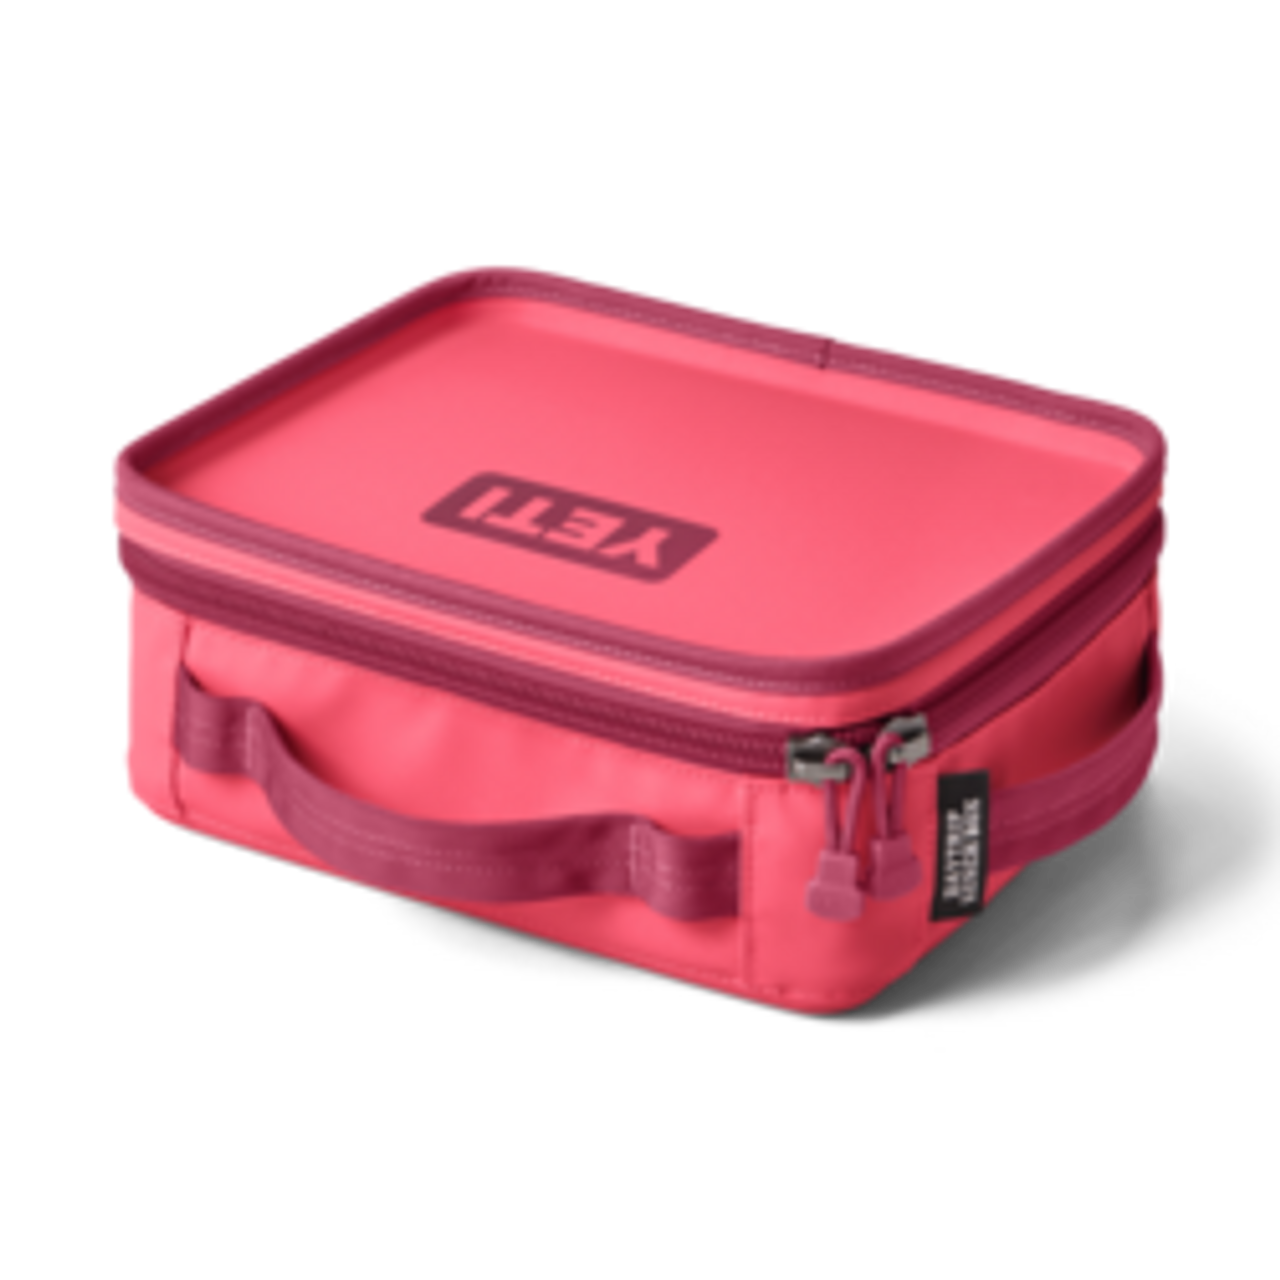 YETI Daytrip Lunchbox Soldout ICEPINK for Sale in Oceanside, CA - OfferUp